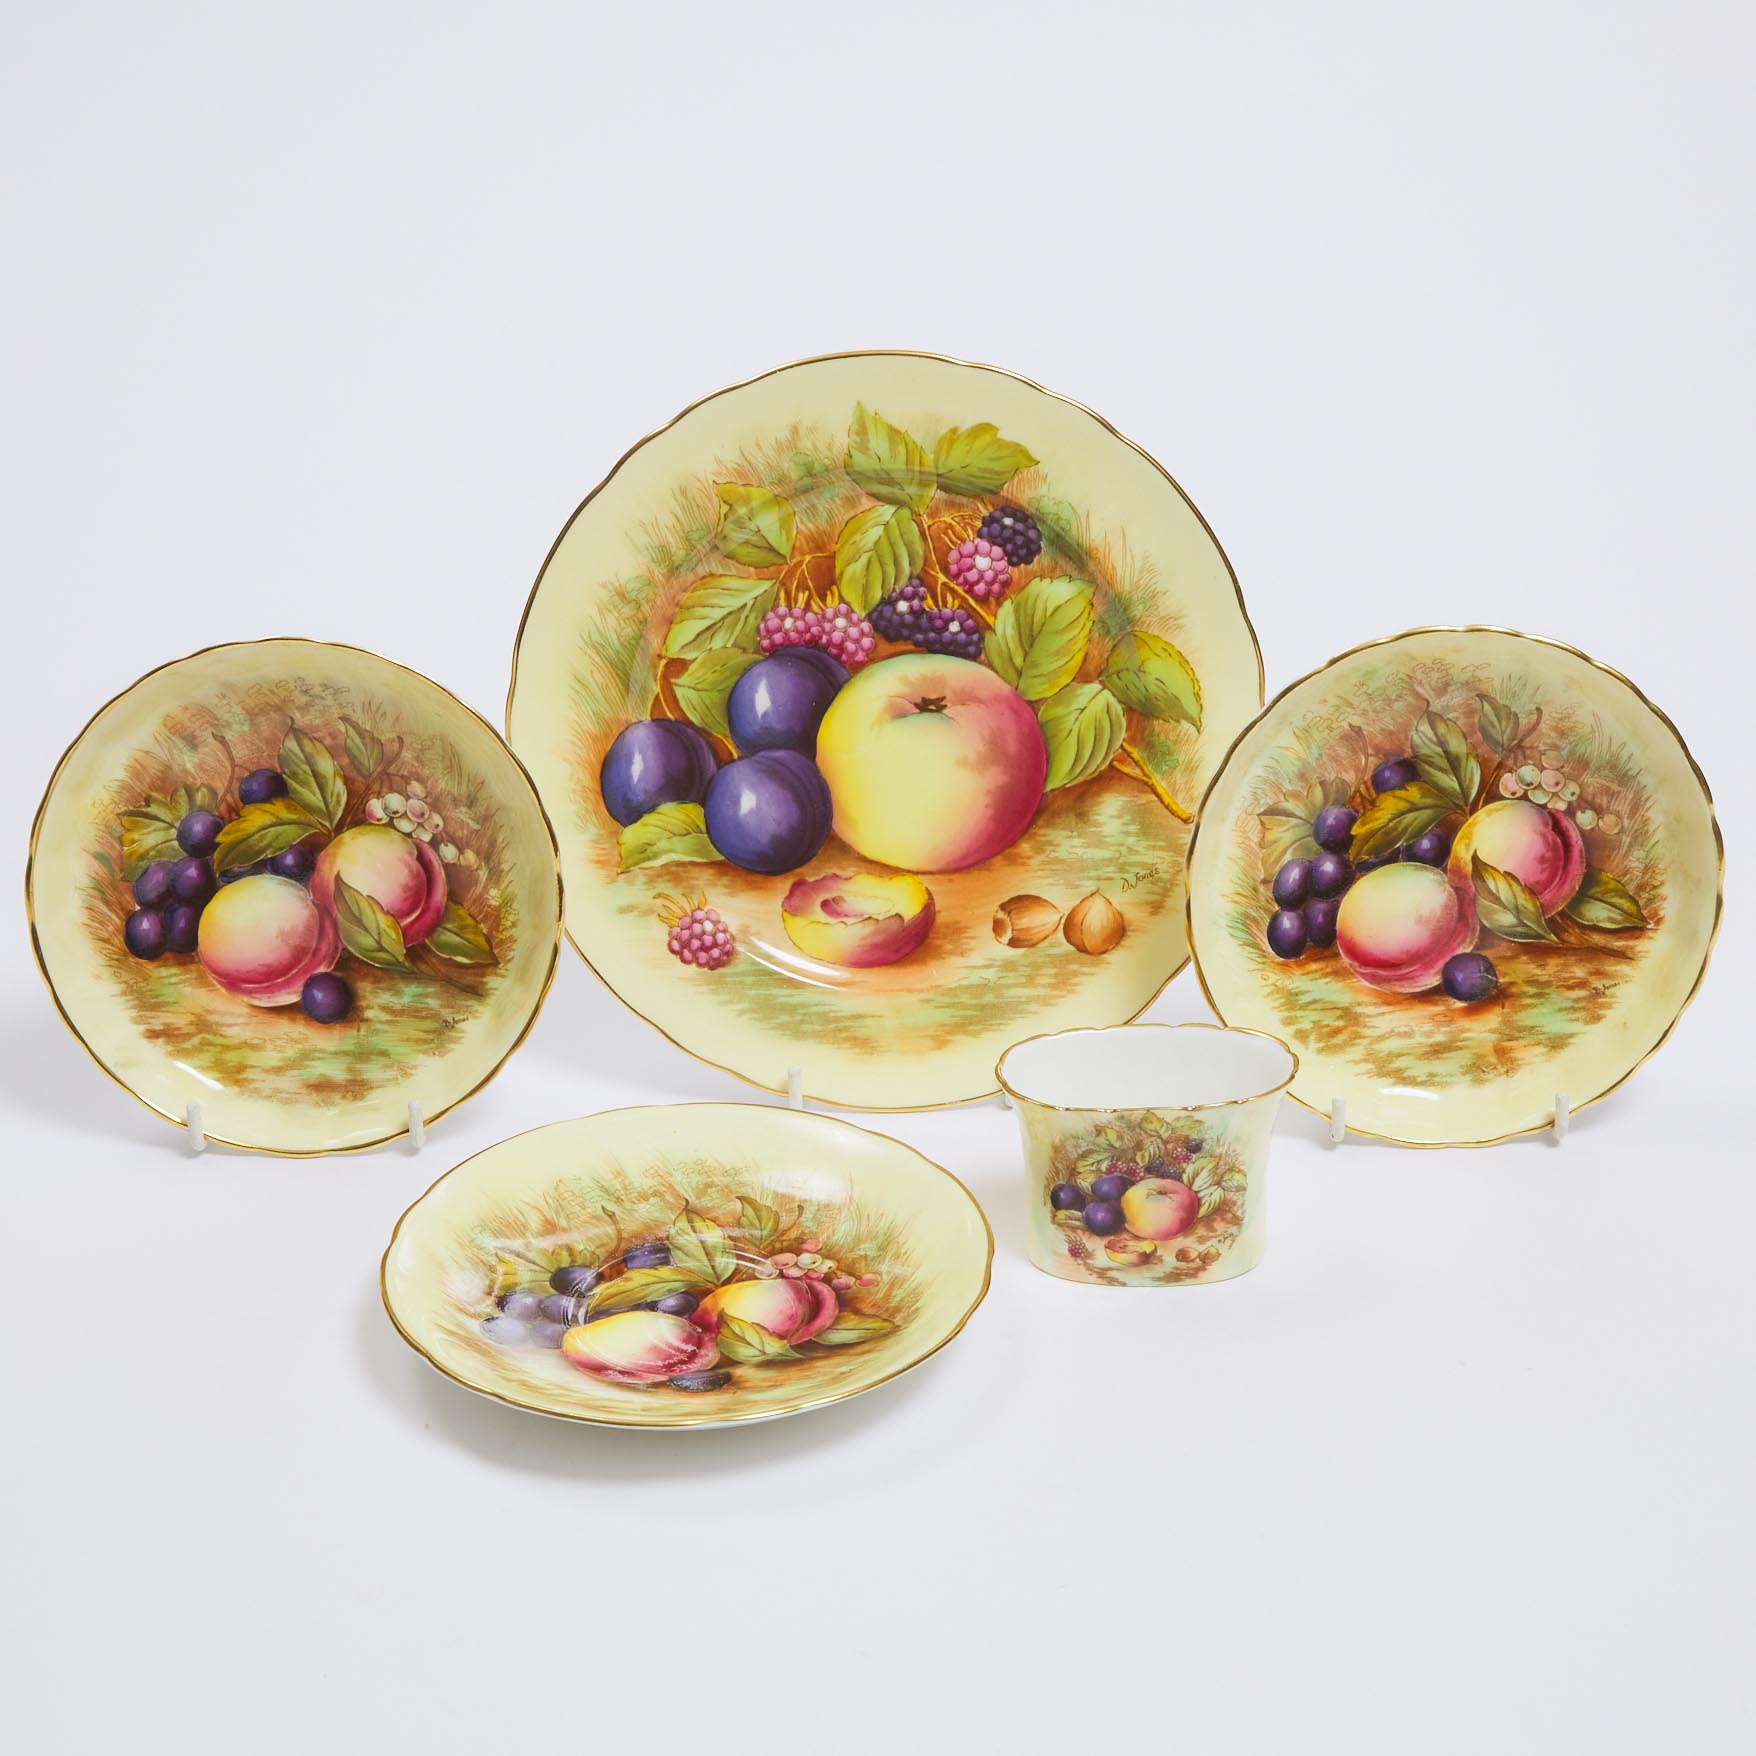 Group of Aynsley 'Orchard Gold' Tablewares, D. Jones, 20th century